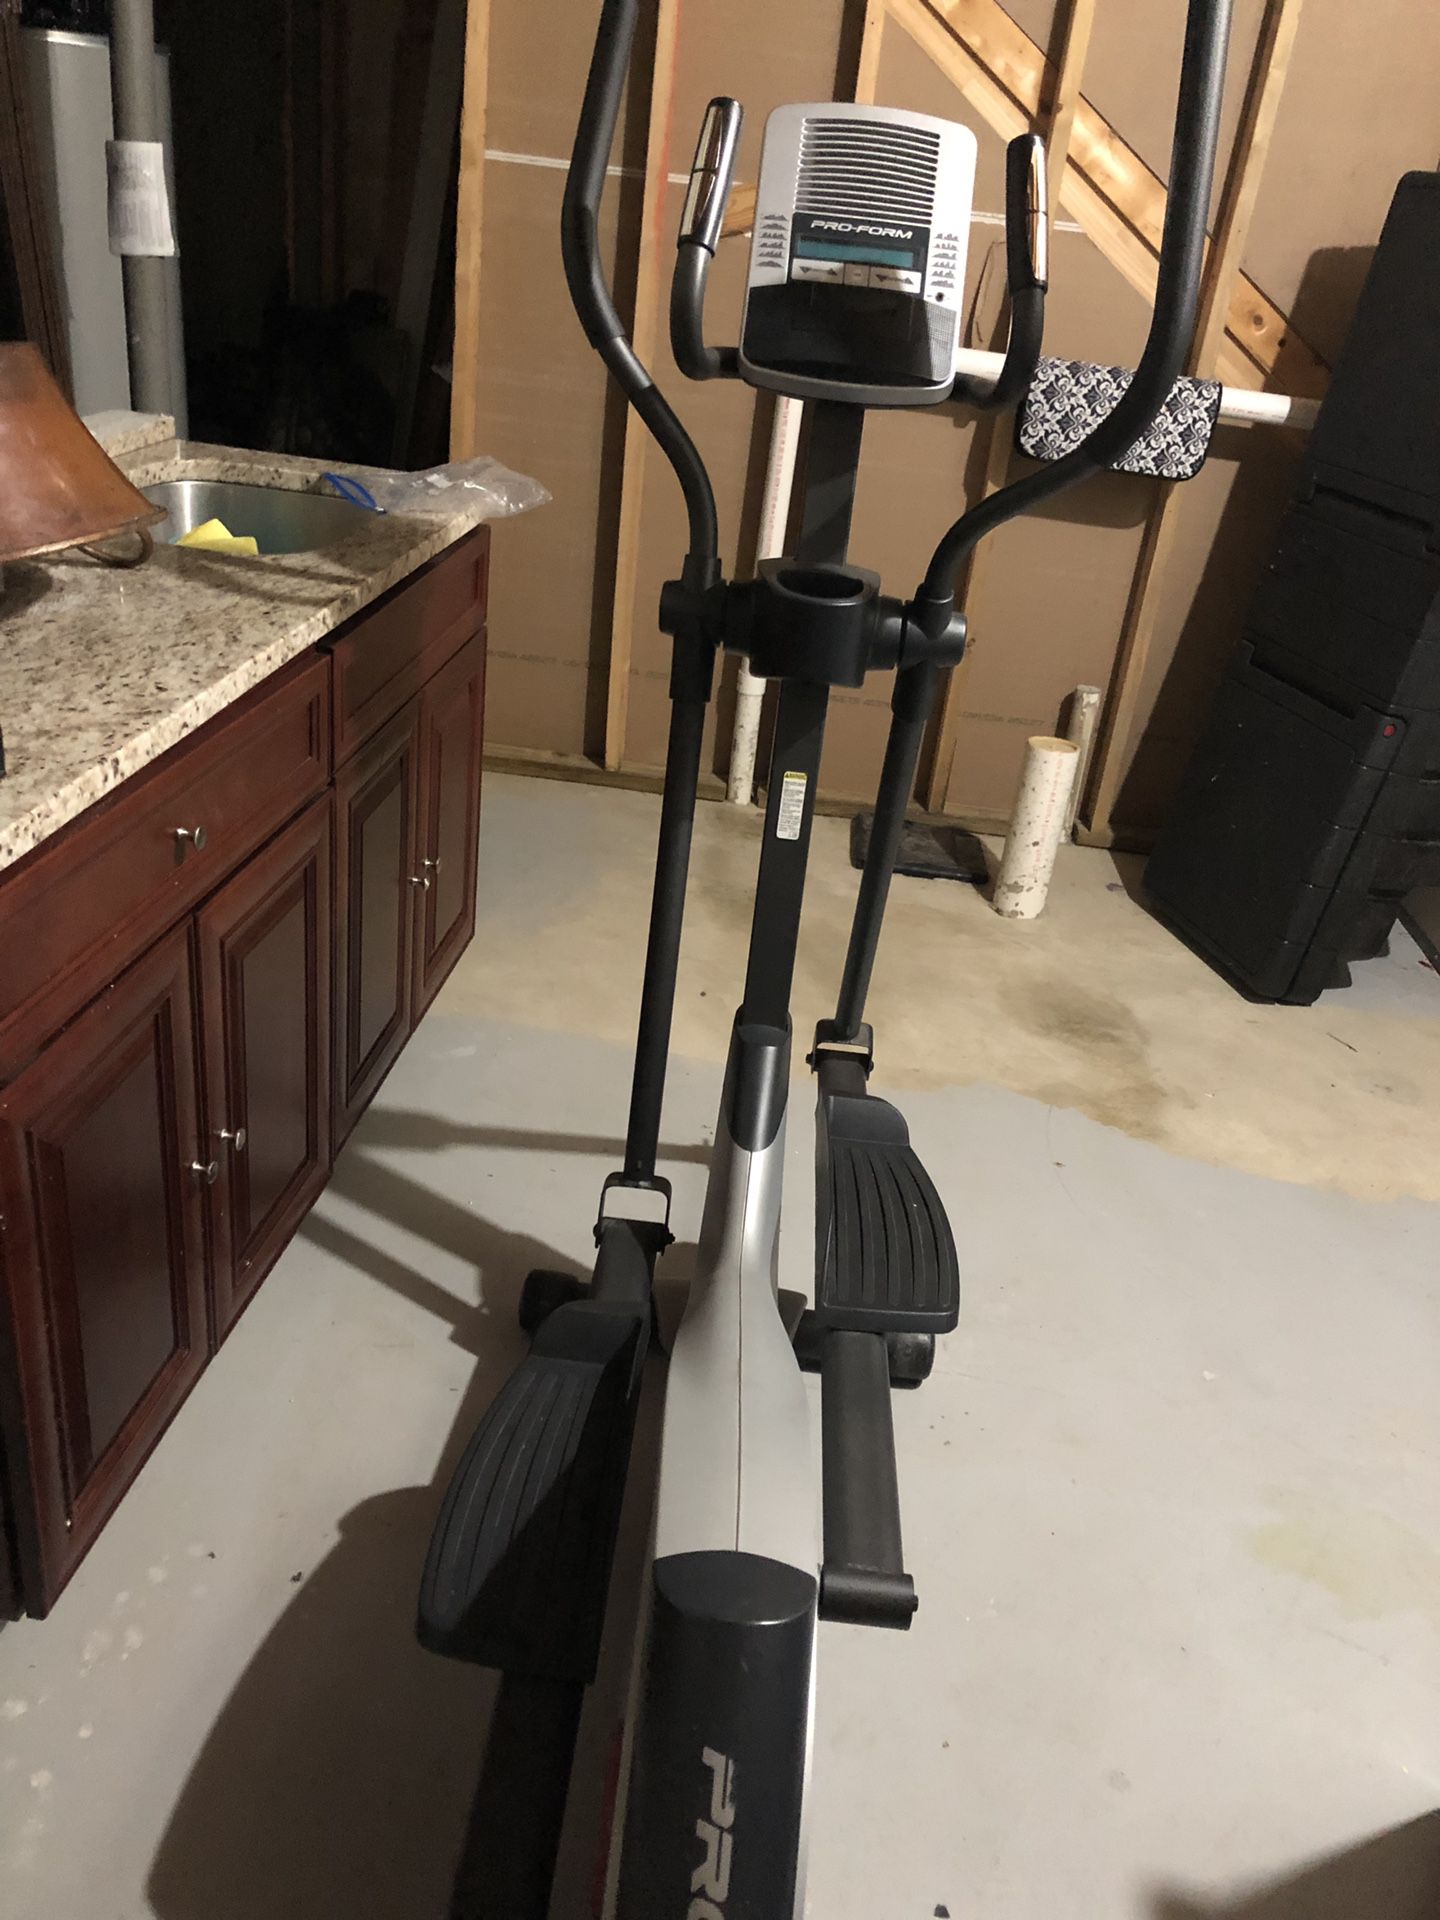 Exercise bike work great good condition